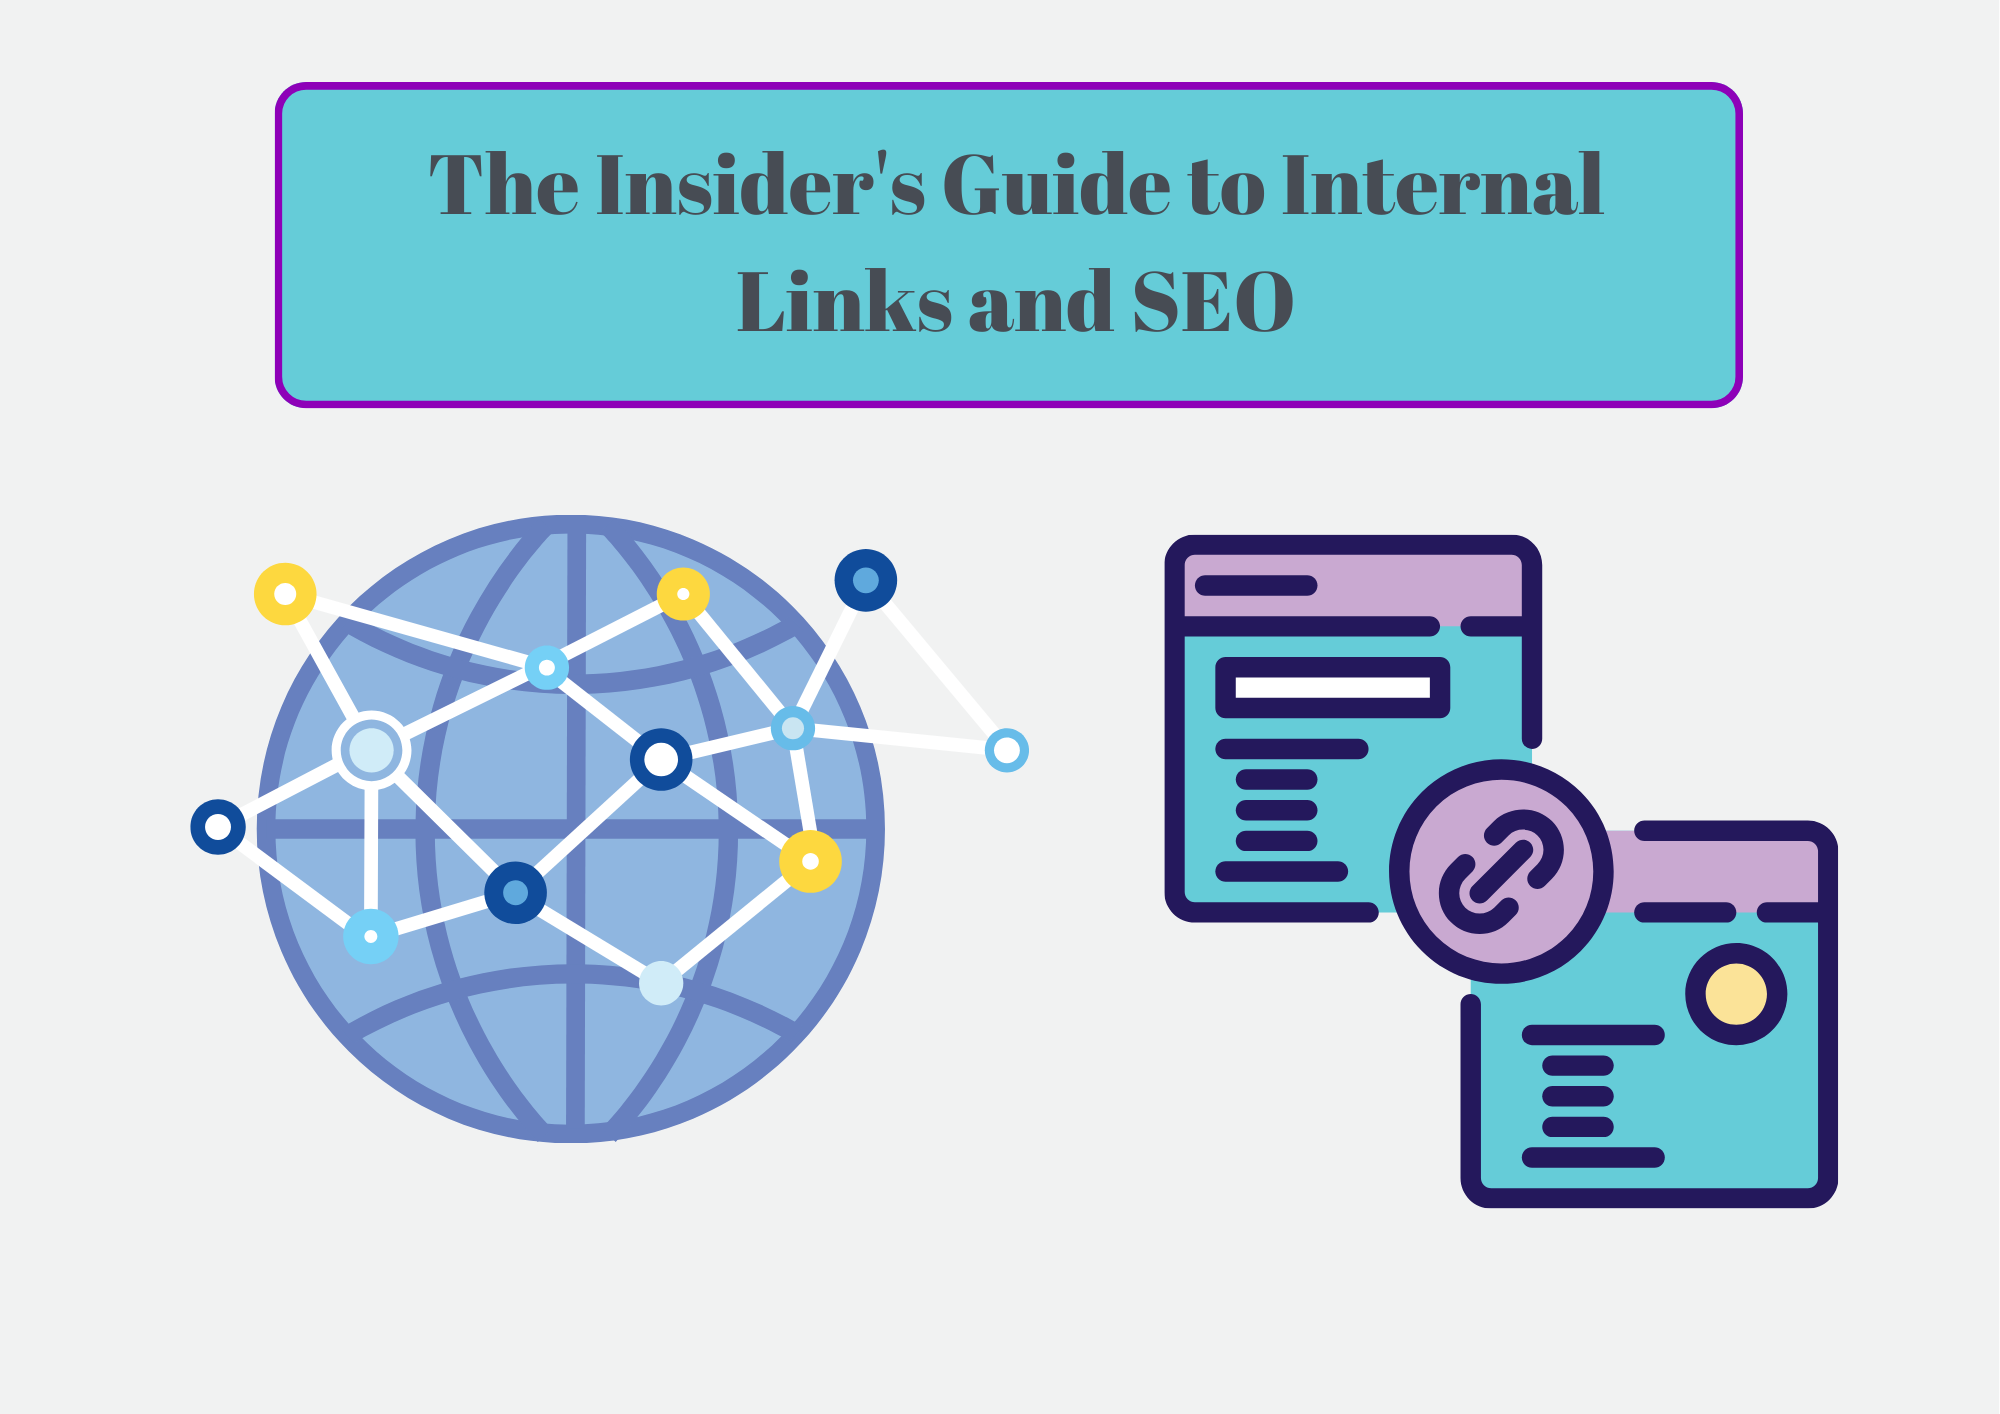 The Insider's Guide to Internal Links and SEO